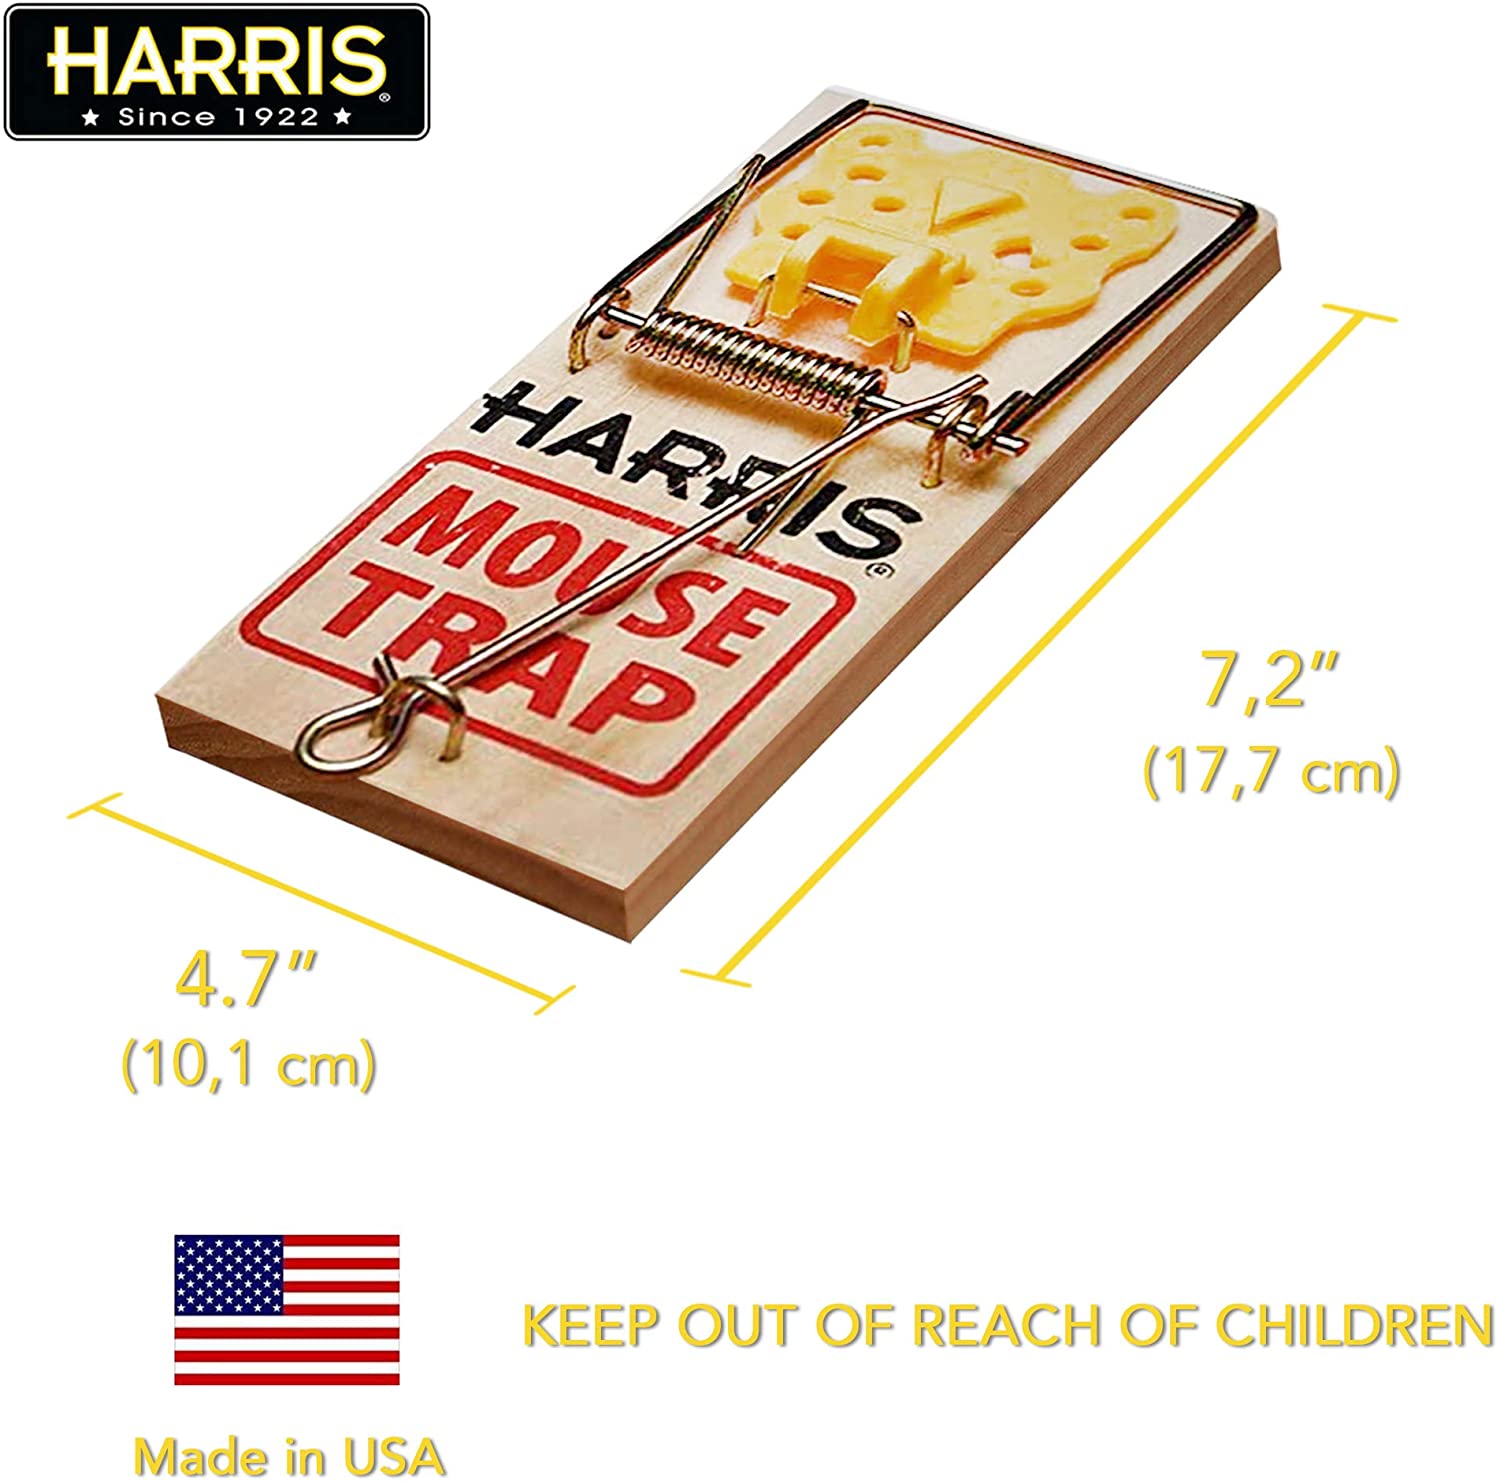 Harris Mouse Snap Trap (6-Pack) - PF Harris